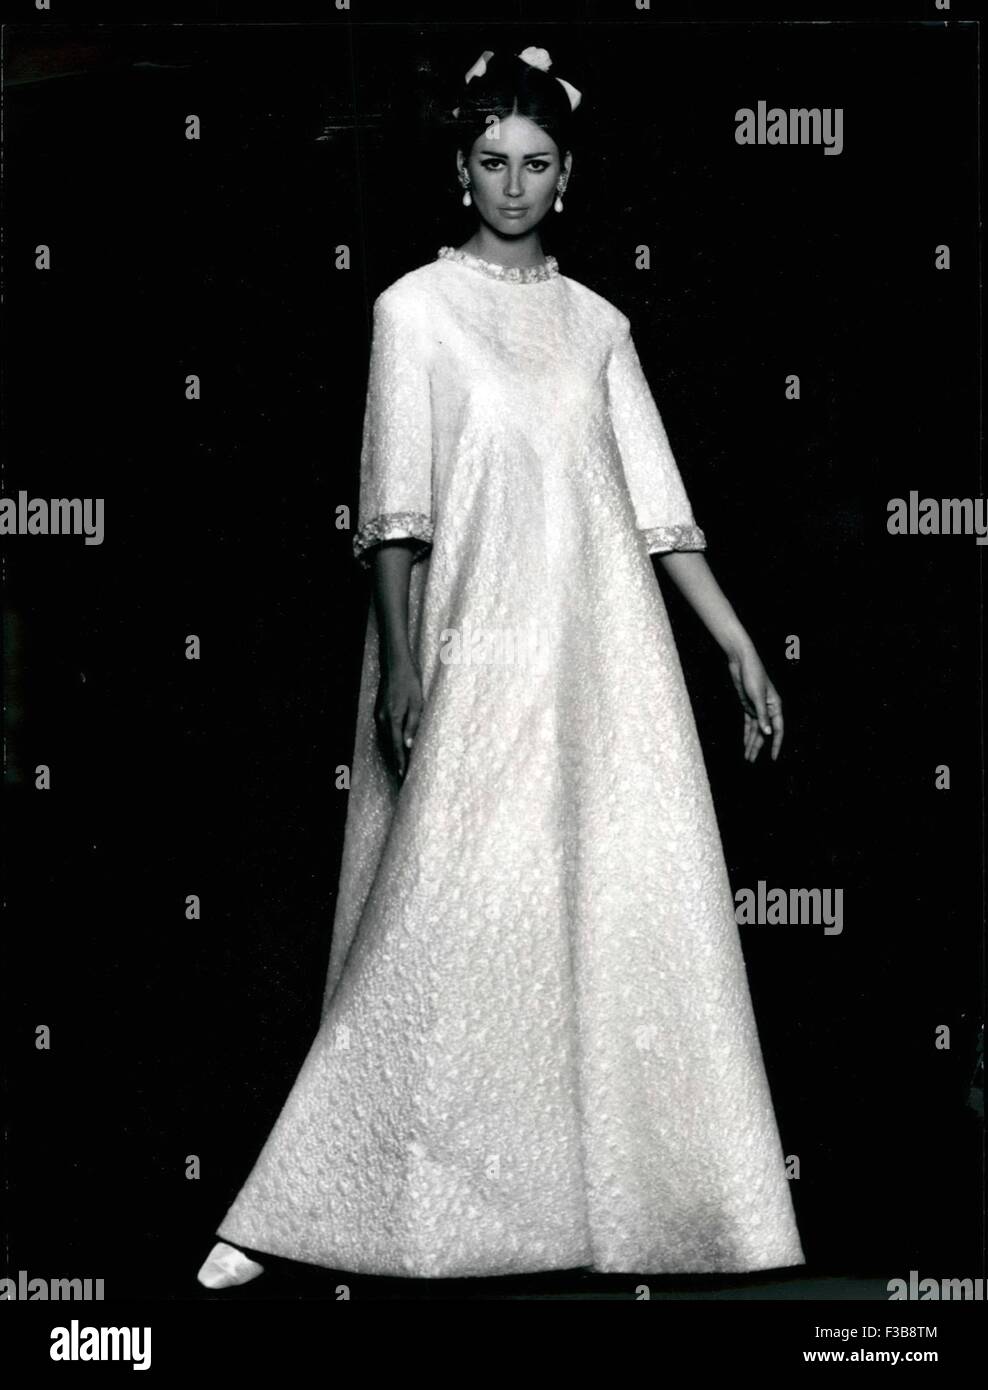 Louis Feraud Wedding Dress Modelled By Editorial Stock Photo - Stock Image